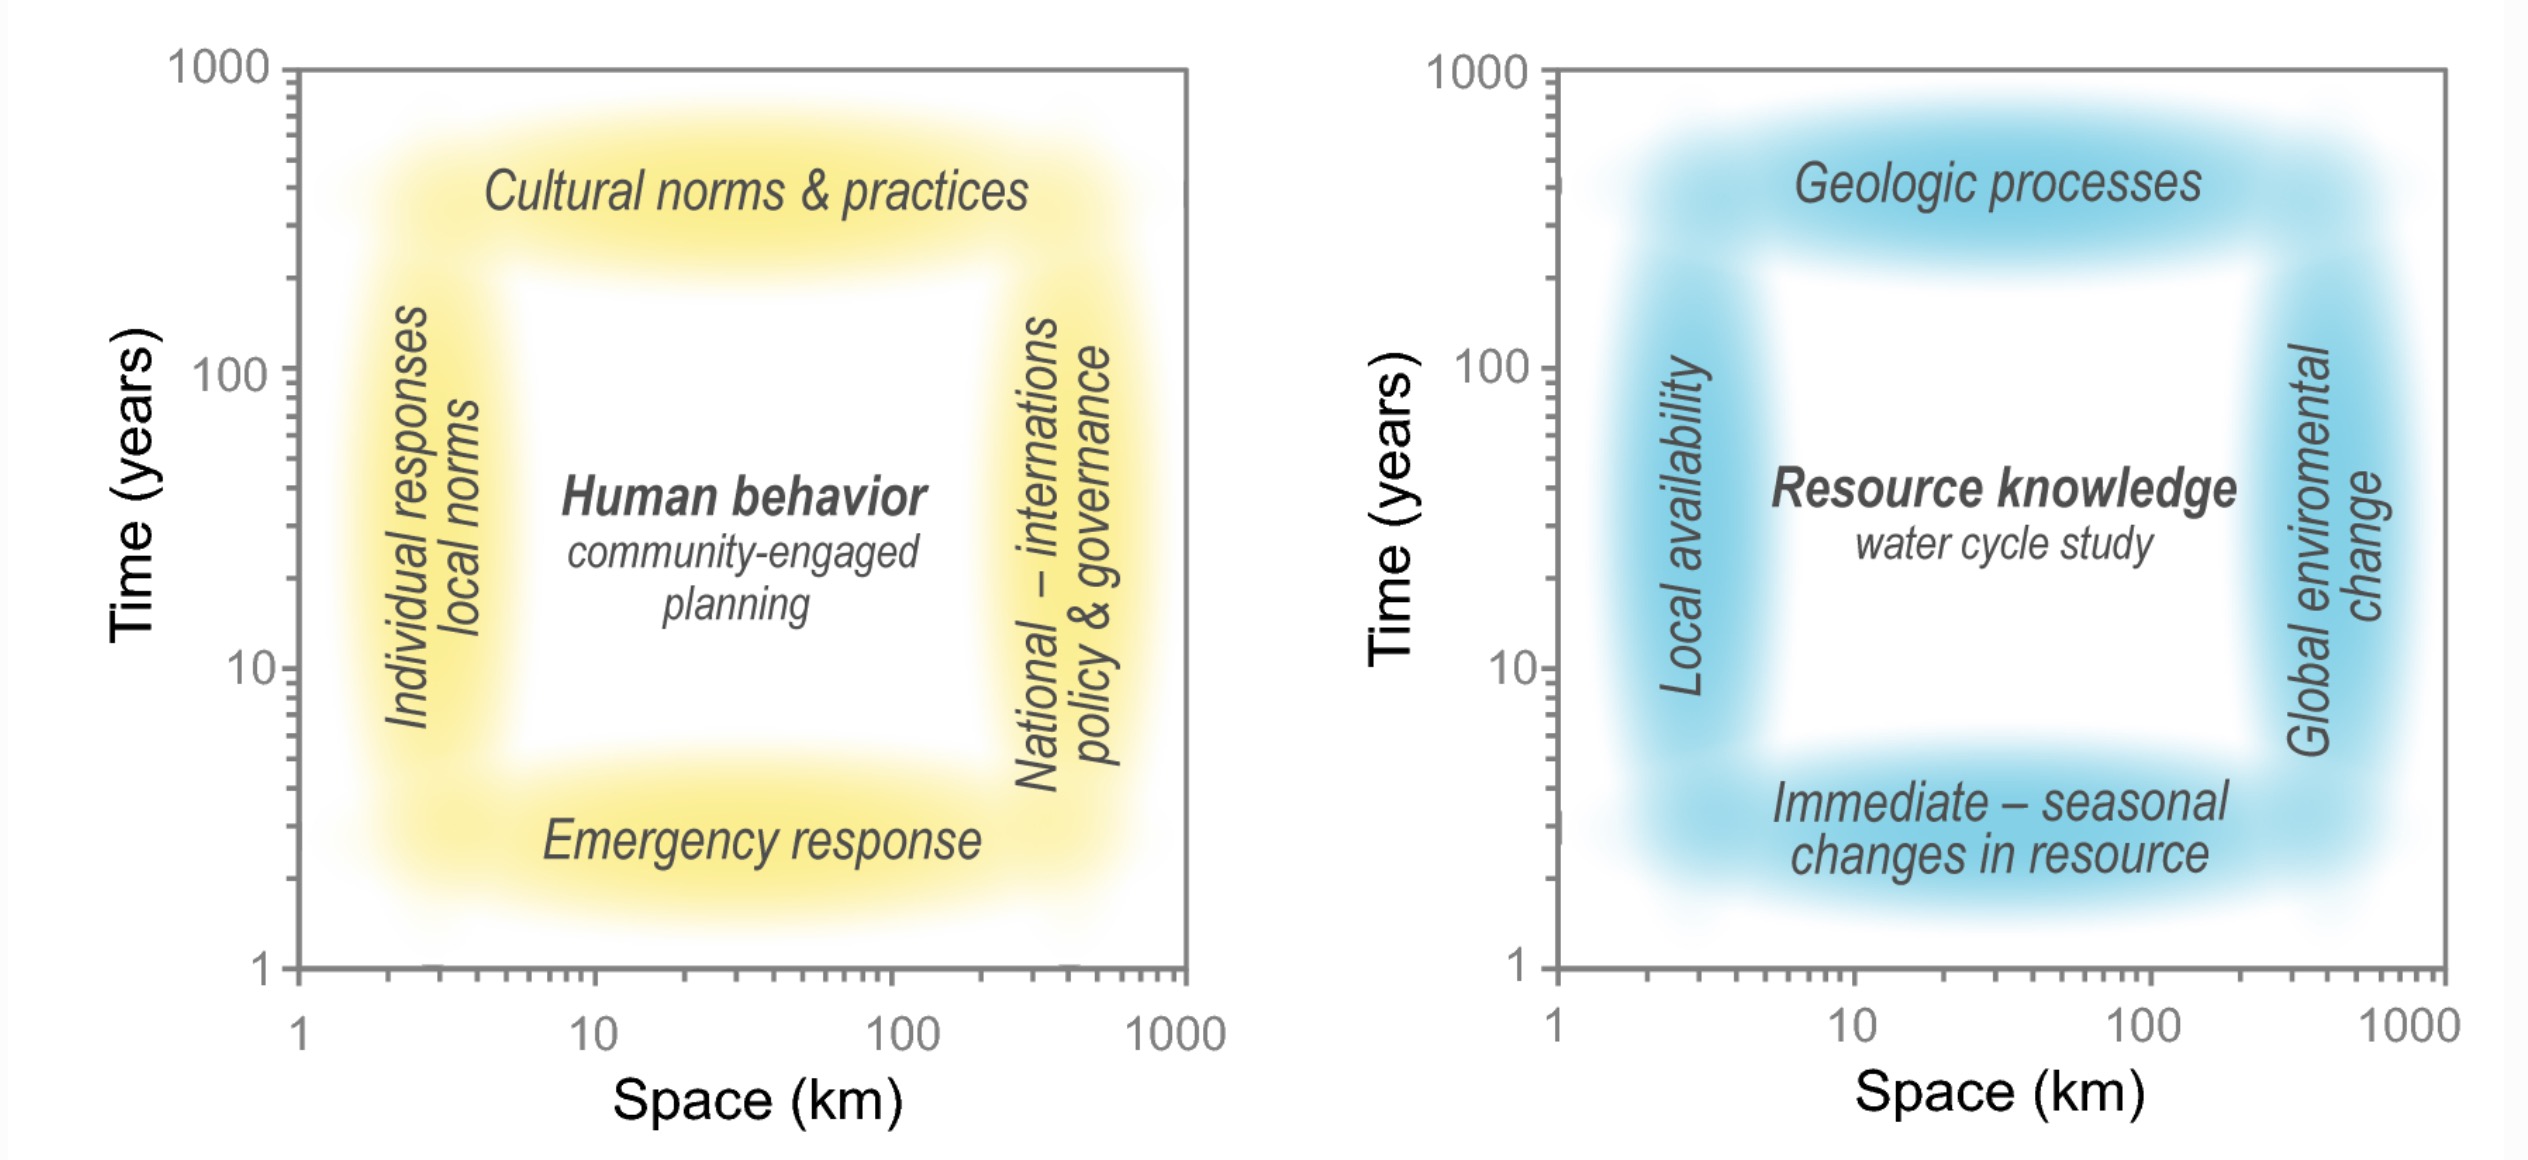 Looking at the data available and the research questions they wanted to ask, the team focused on the themes of space and time. You’ll see that in the outline of the frameworks below. Both systems – social and hydrological – have dimensions of space (on the horizontal axis) and time (on the vertical axis).